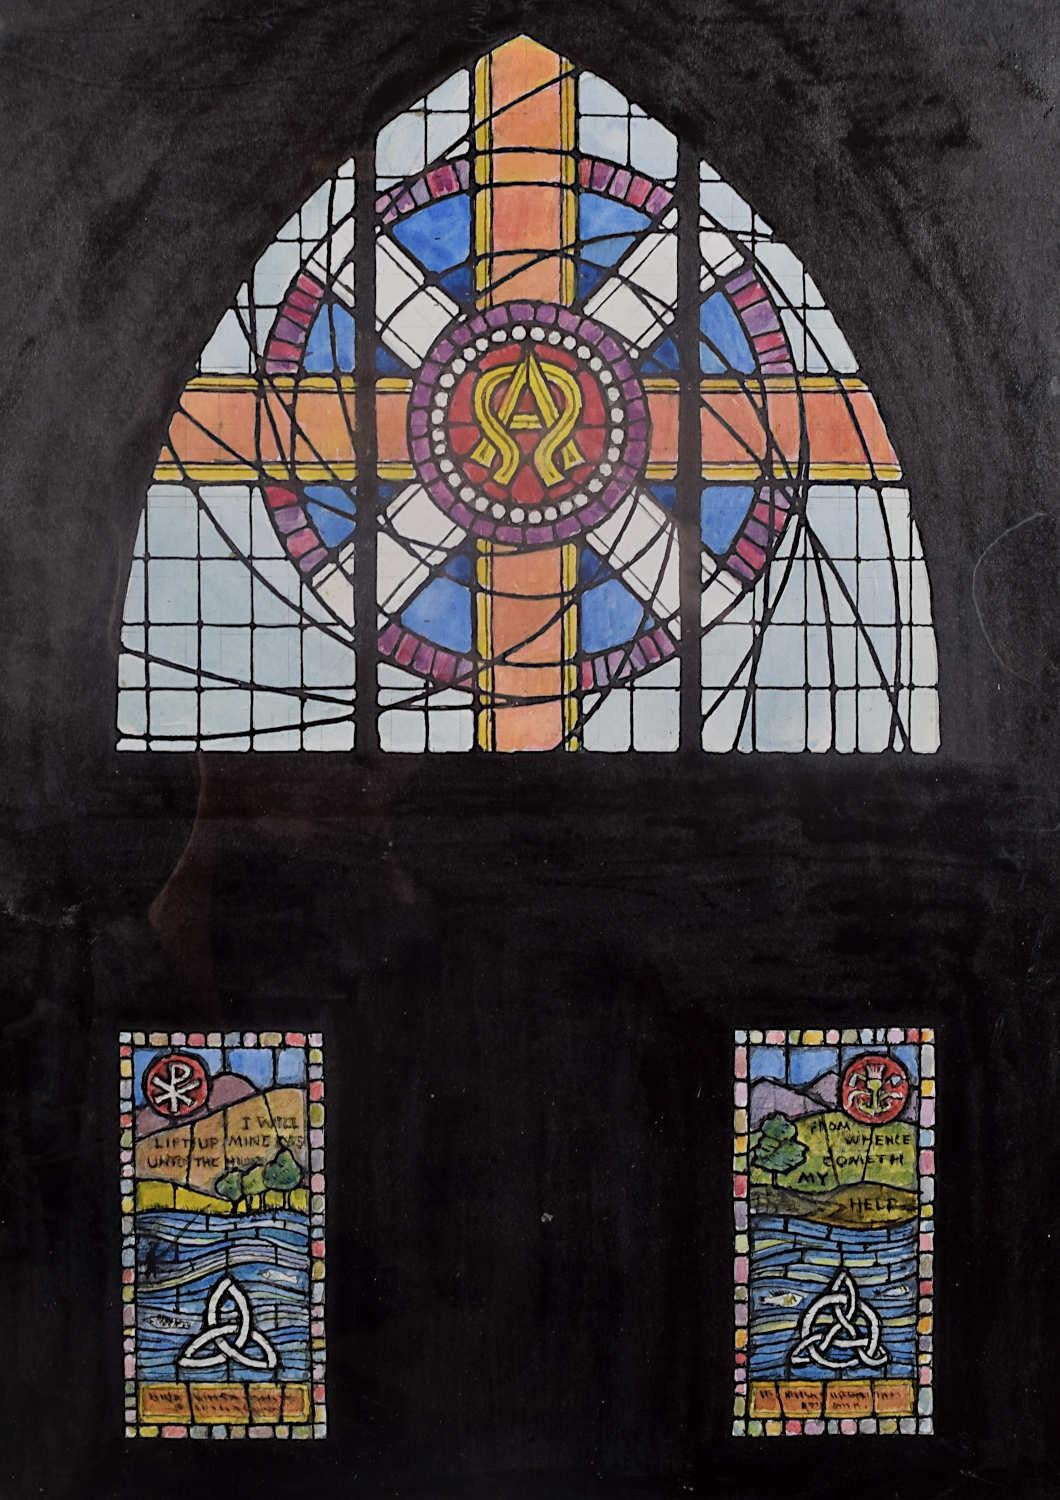 We acquired a series of watercolour stained glass designs from Jane Gray's studio. To find more scroll down to "More from this Seller" and below it click on "See all from this seller." 

Jane Gray (b.1931)
Stained Glass Design
Watercolour
28.5 x